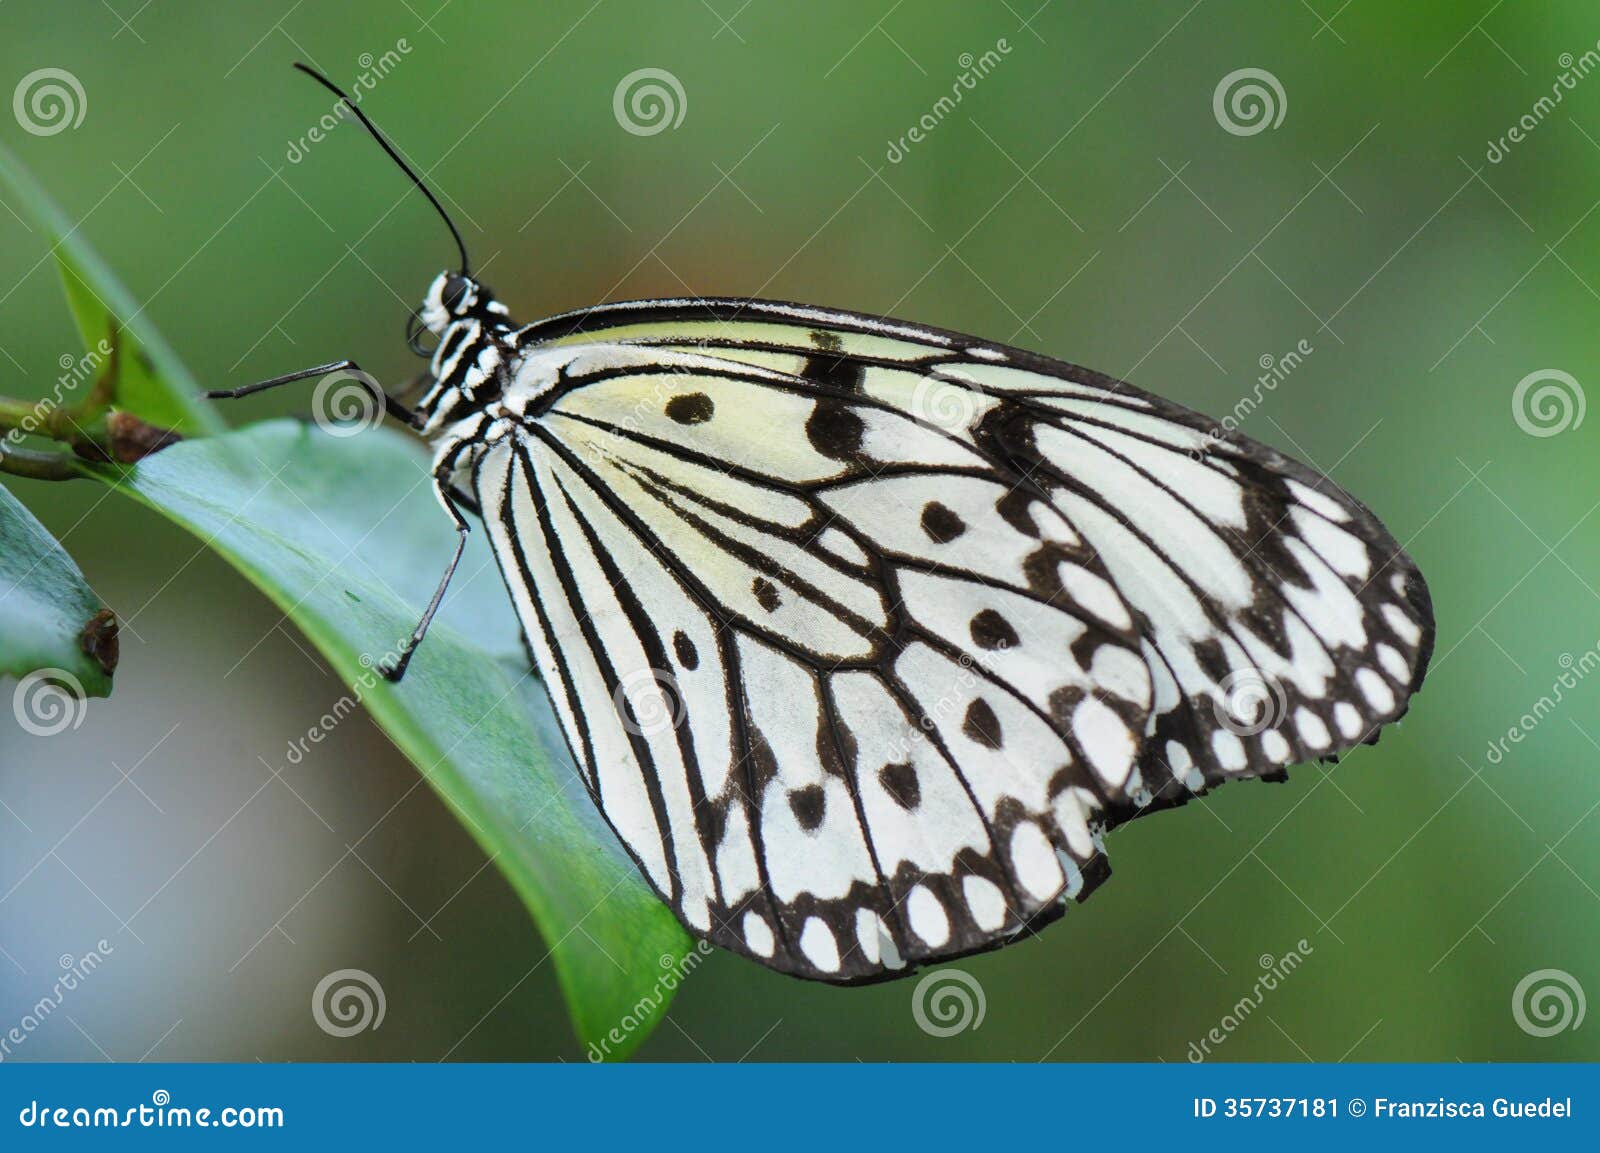 The white tree nymph is a beautiful black and white butterfly. This one is sitting on the leaf of a tree.